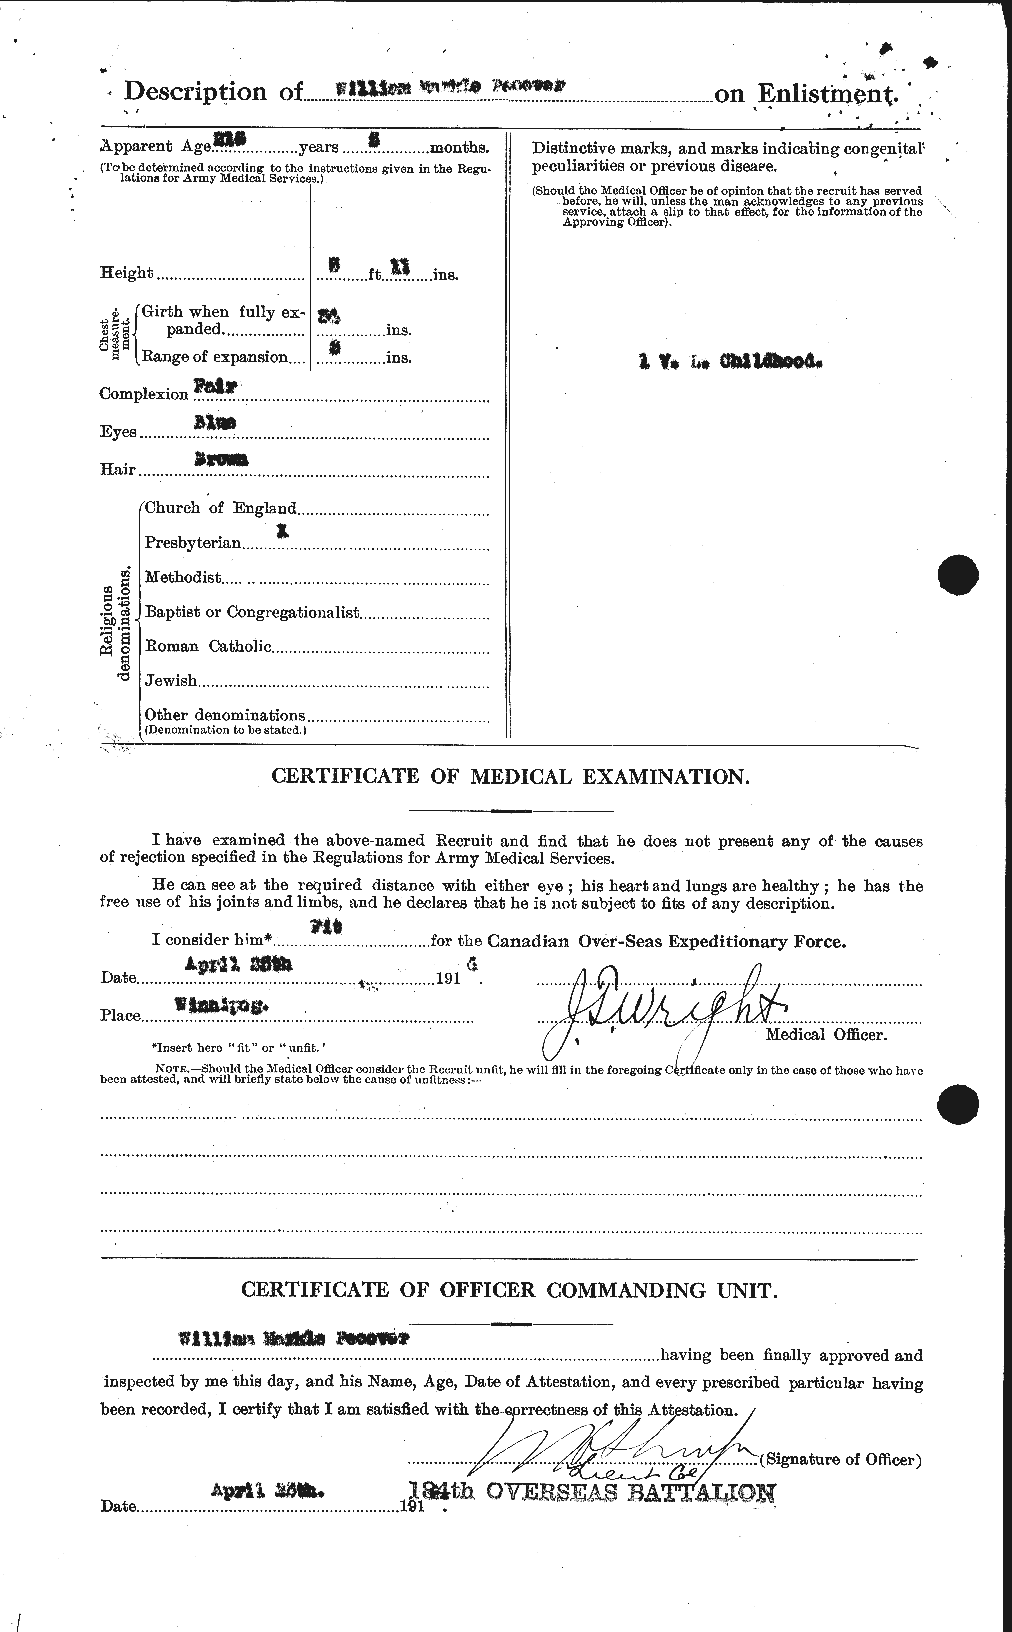 Personnel Records of the First World War - CEF 571211b